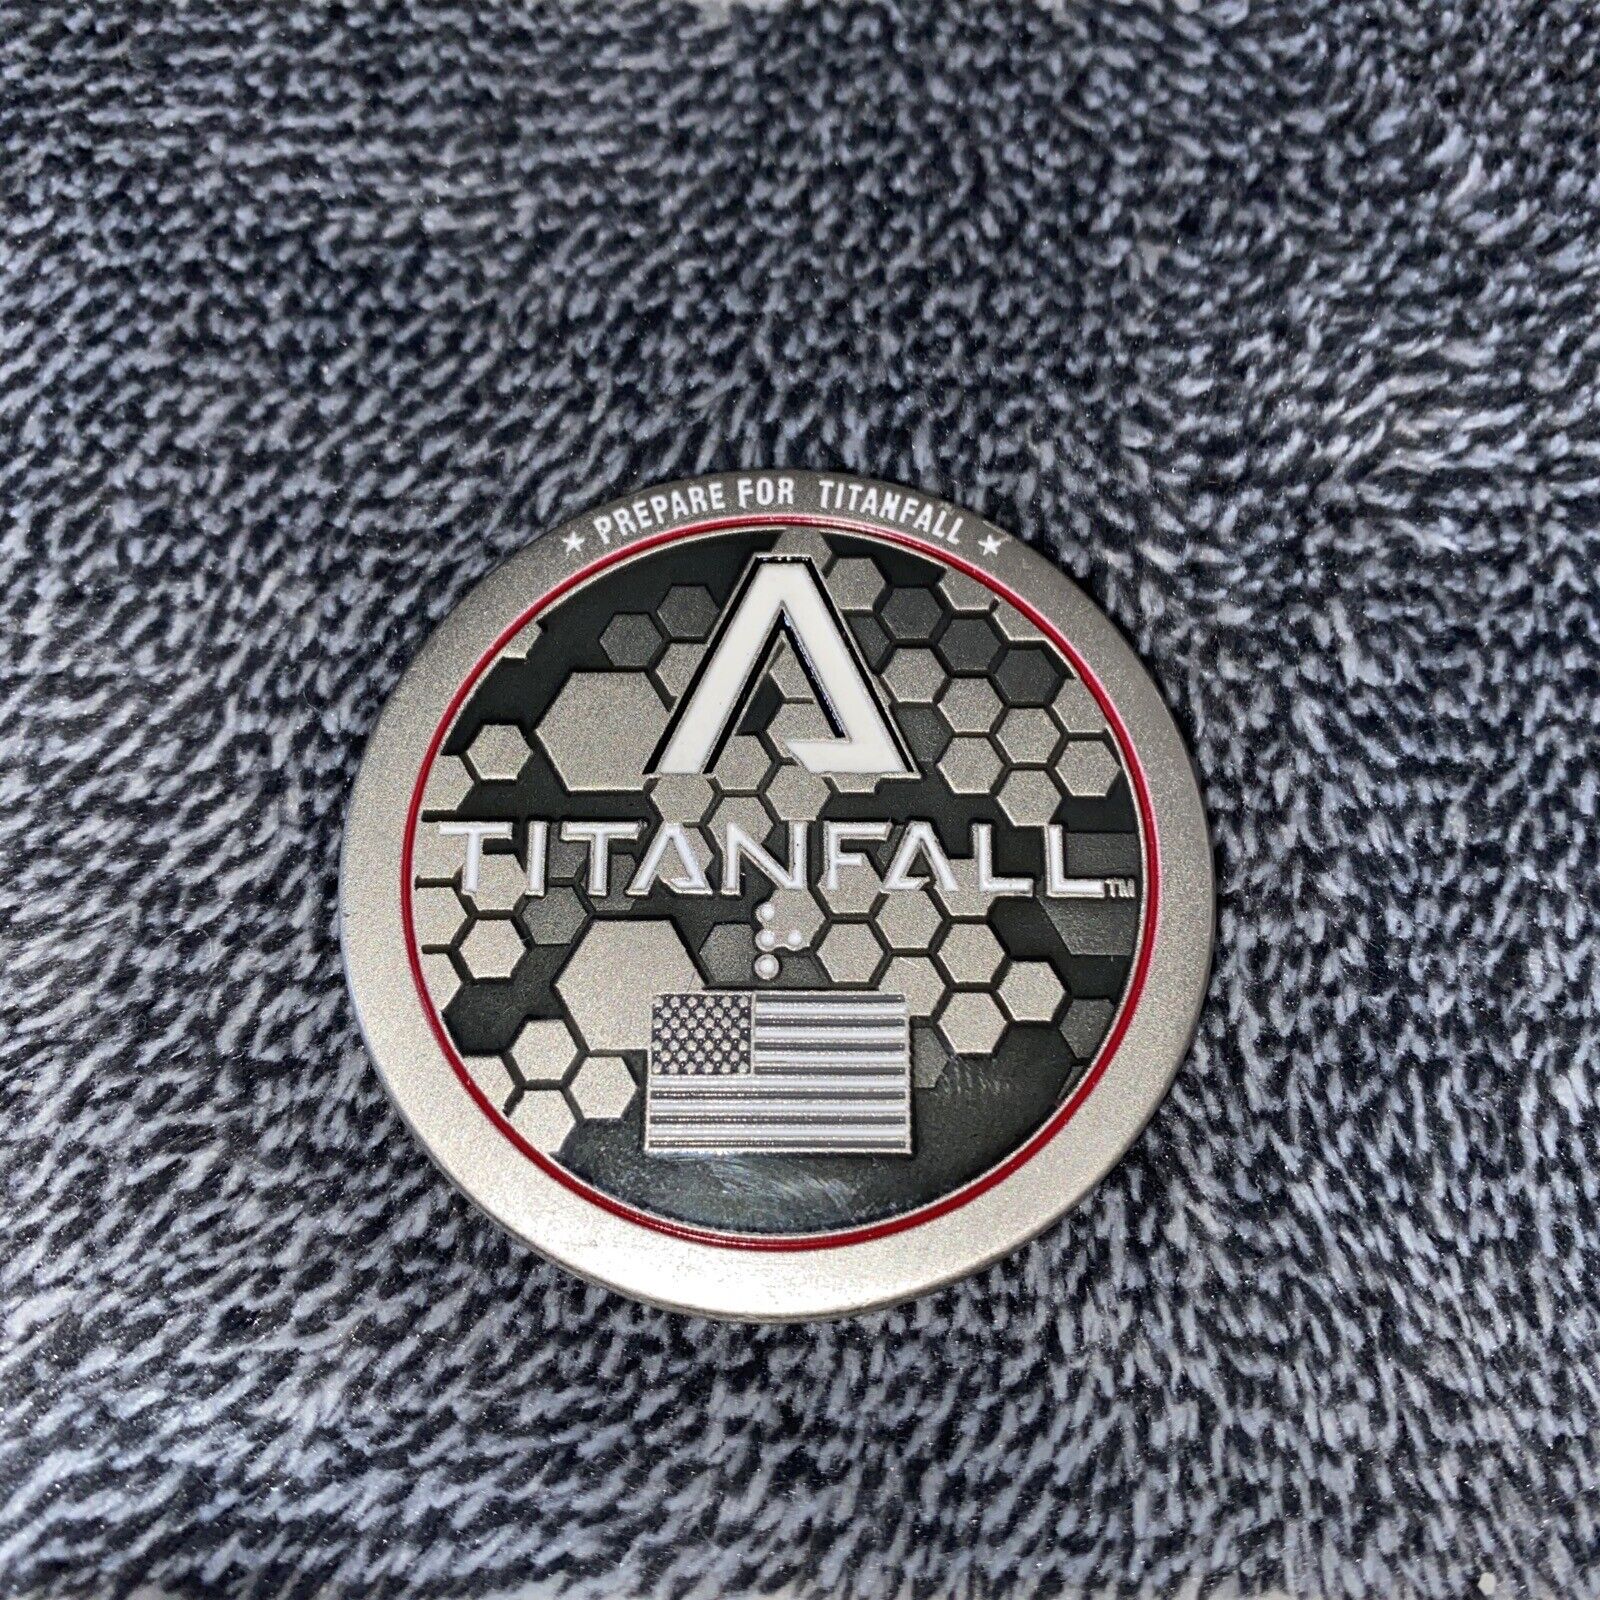 Respawn TITANFALL Challenge Coin Medal Rare Promo Military XBOX One PlayStation 